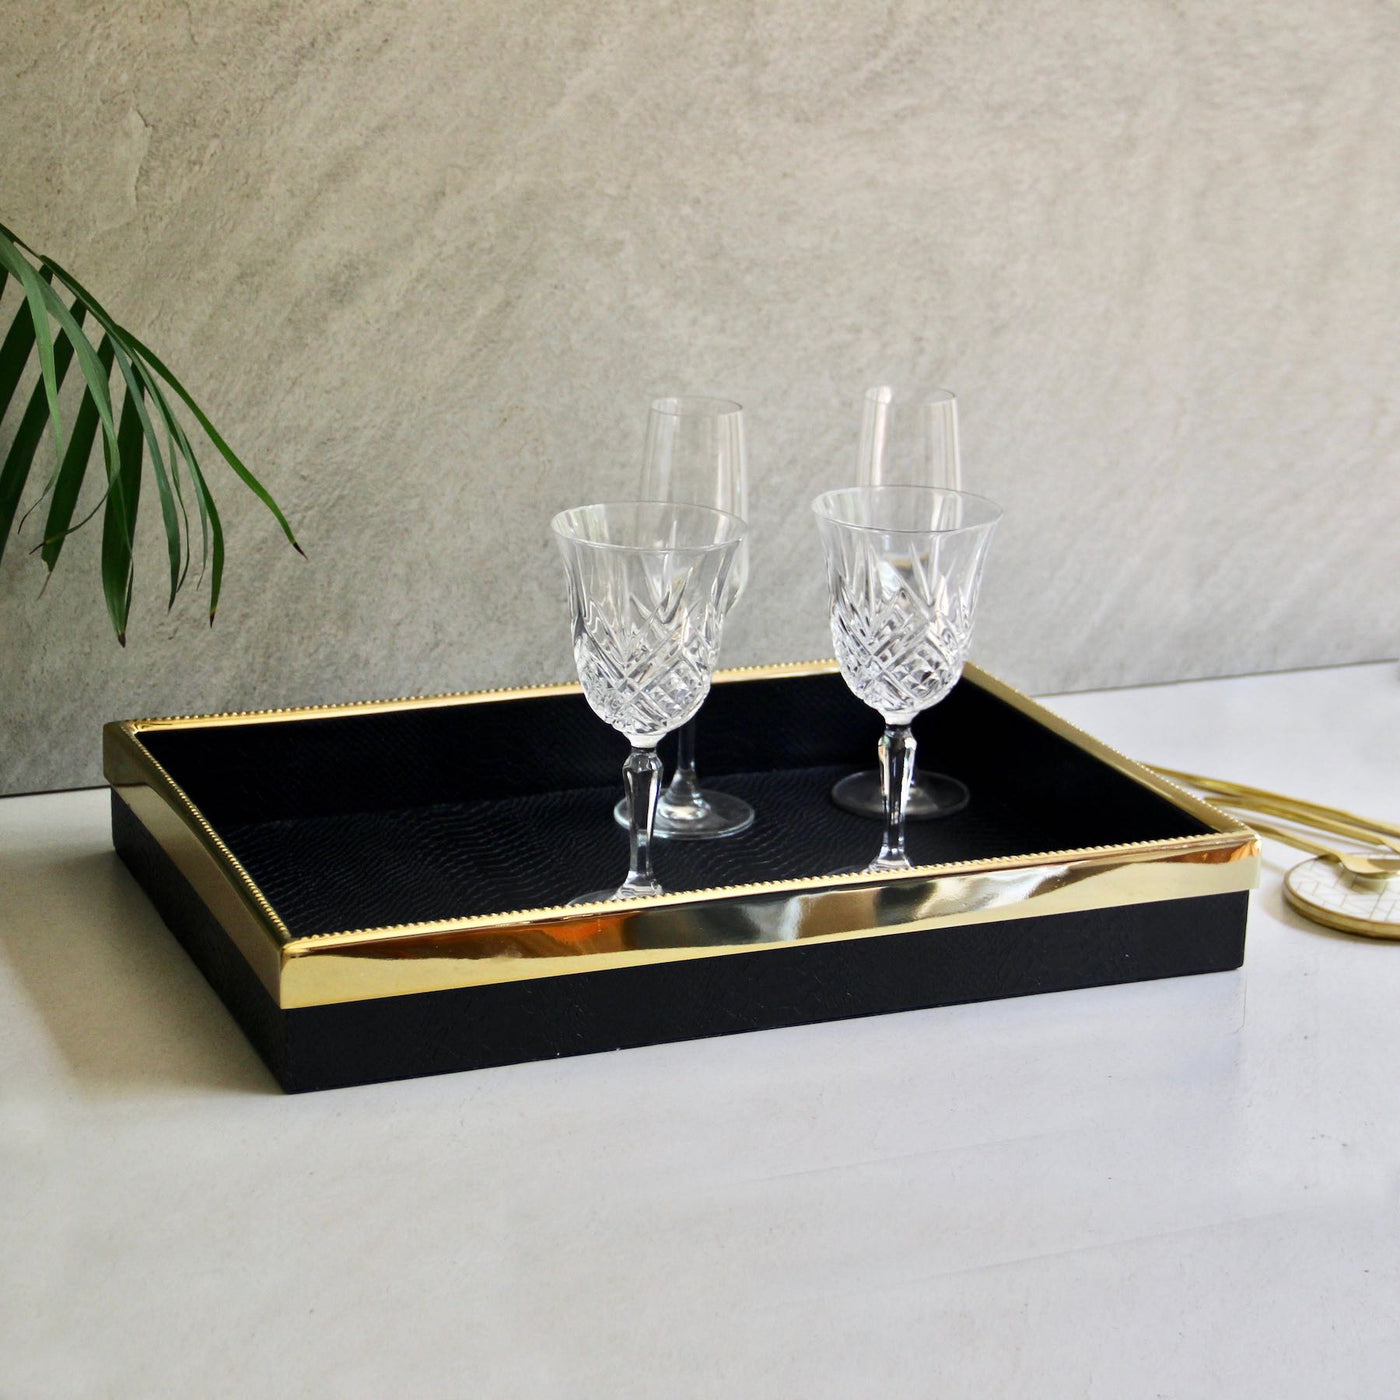 faux leather & gold serving tray